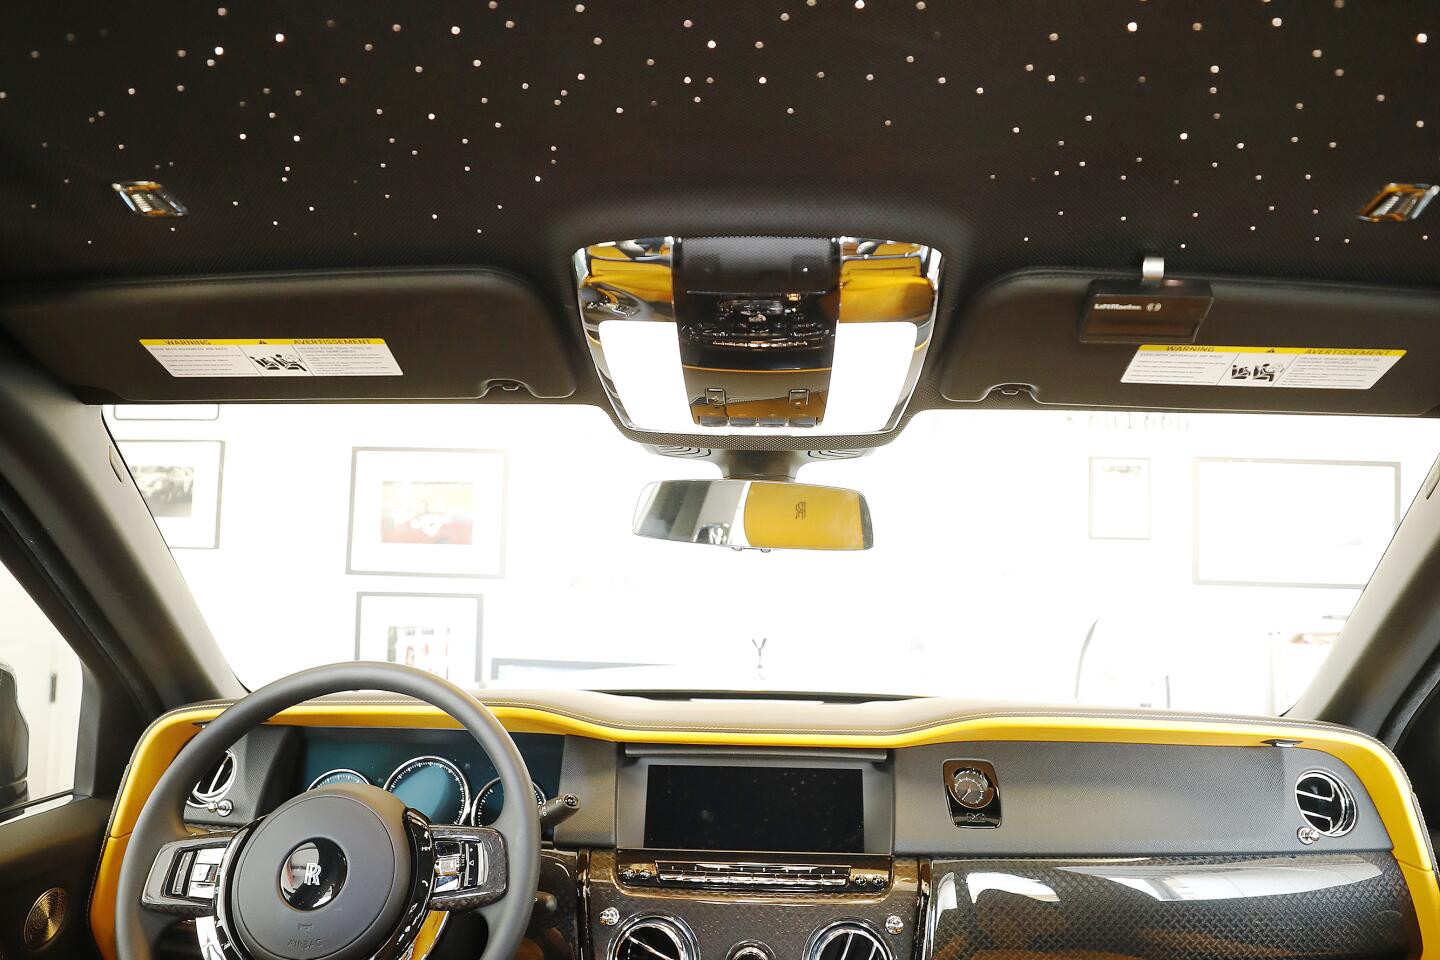 The ceiling of the Rolls-Royce Cullinan Black Badge is made to look like a starry night sky.